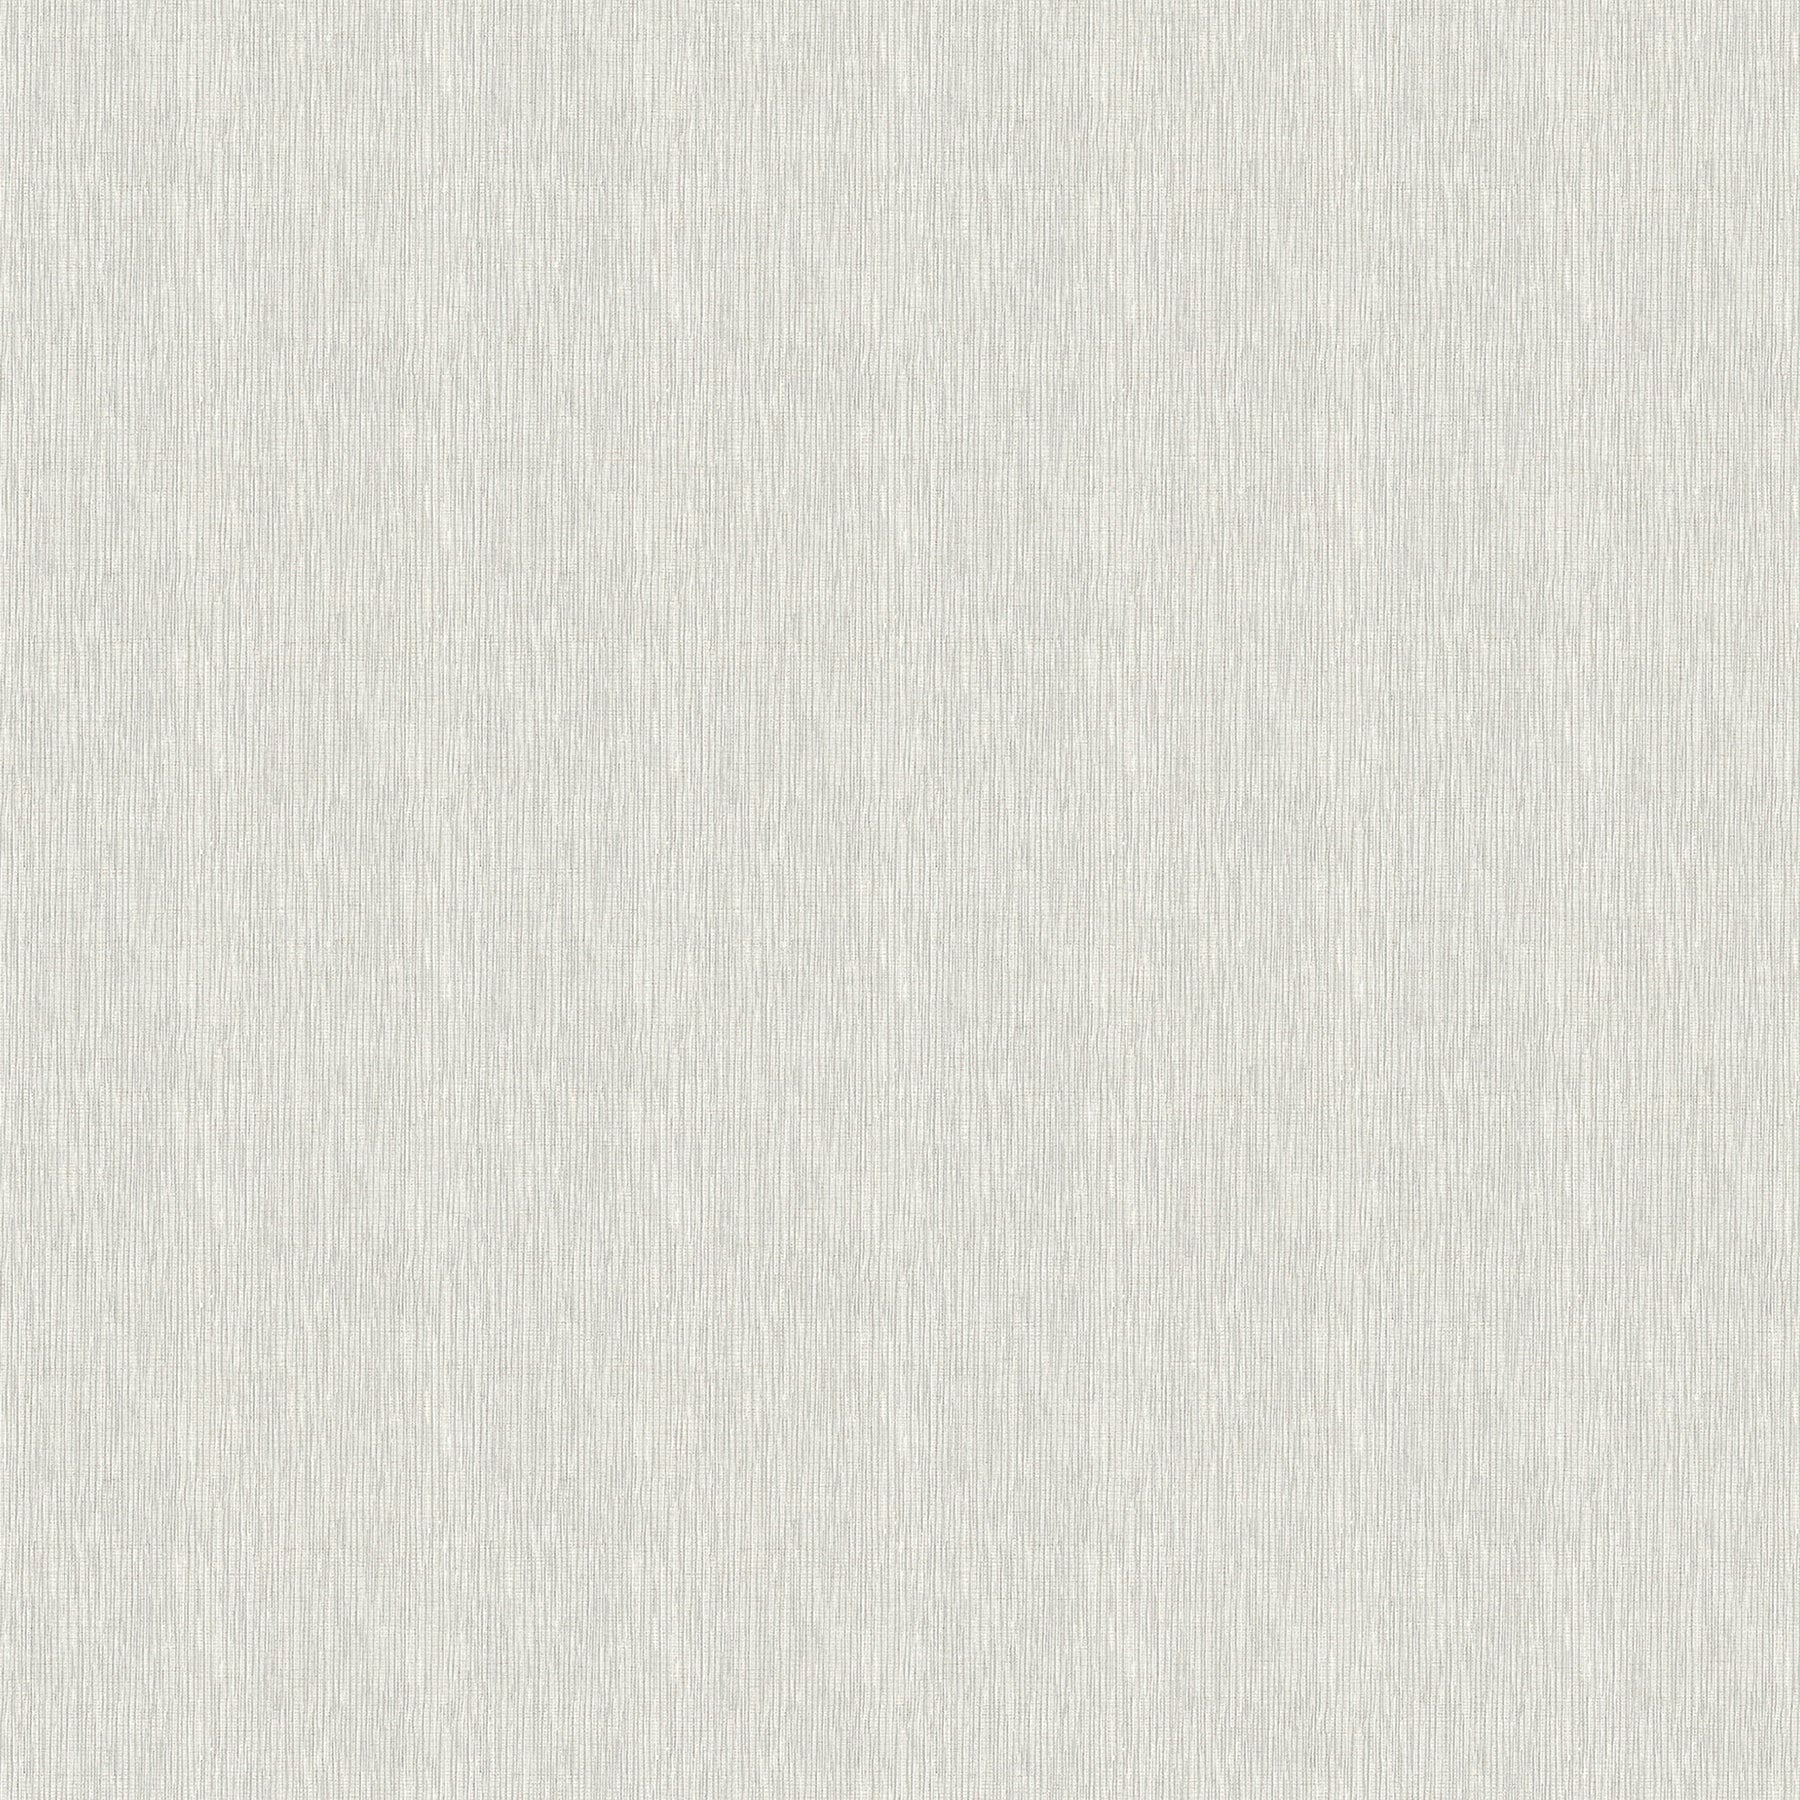 Order 4015-36976-5 Beyond Textures Seaton Taupe Linen Texture Taupe by Advantage